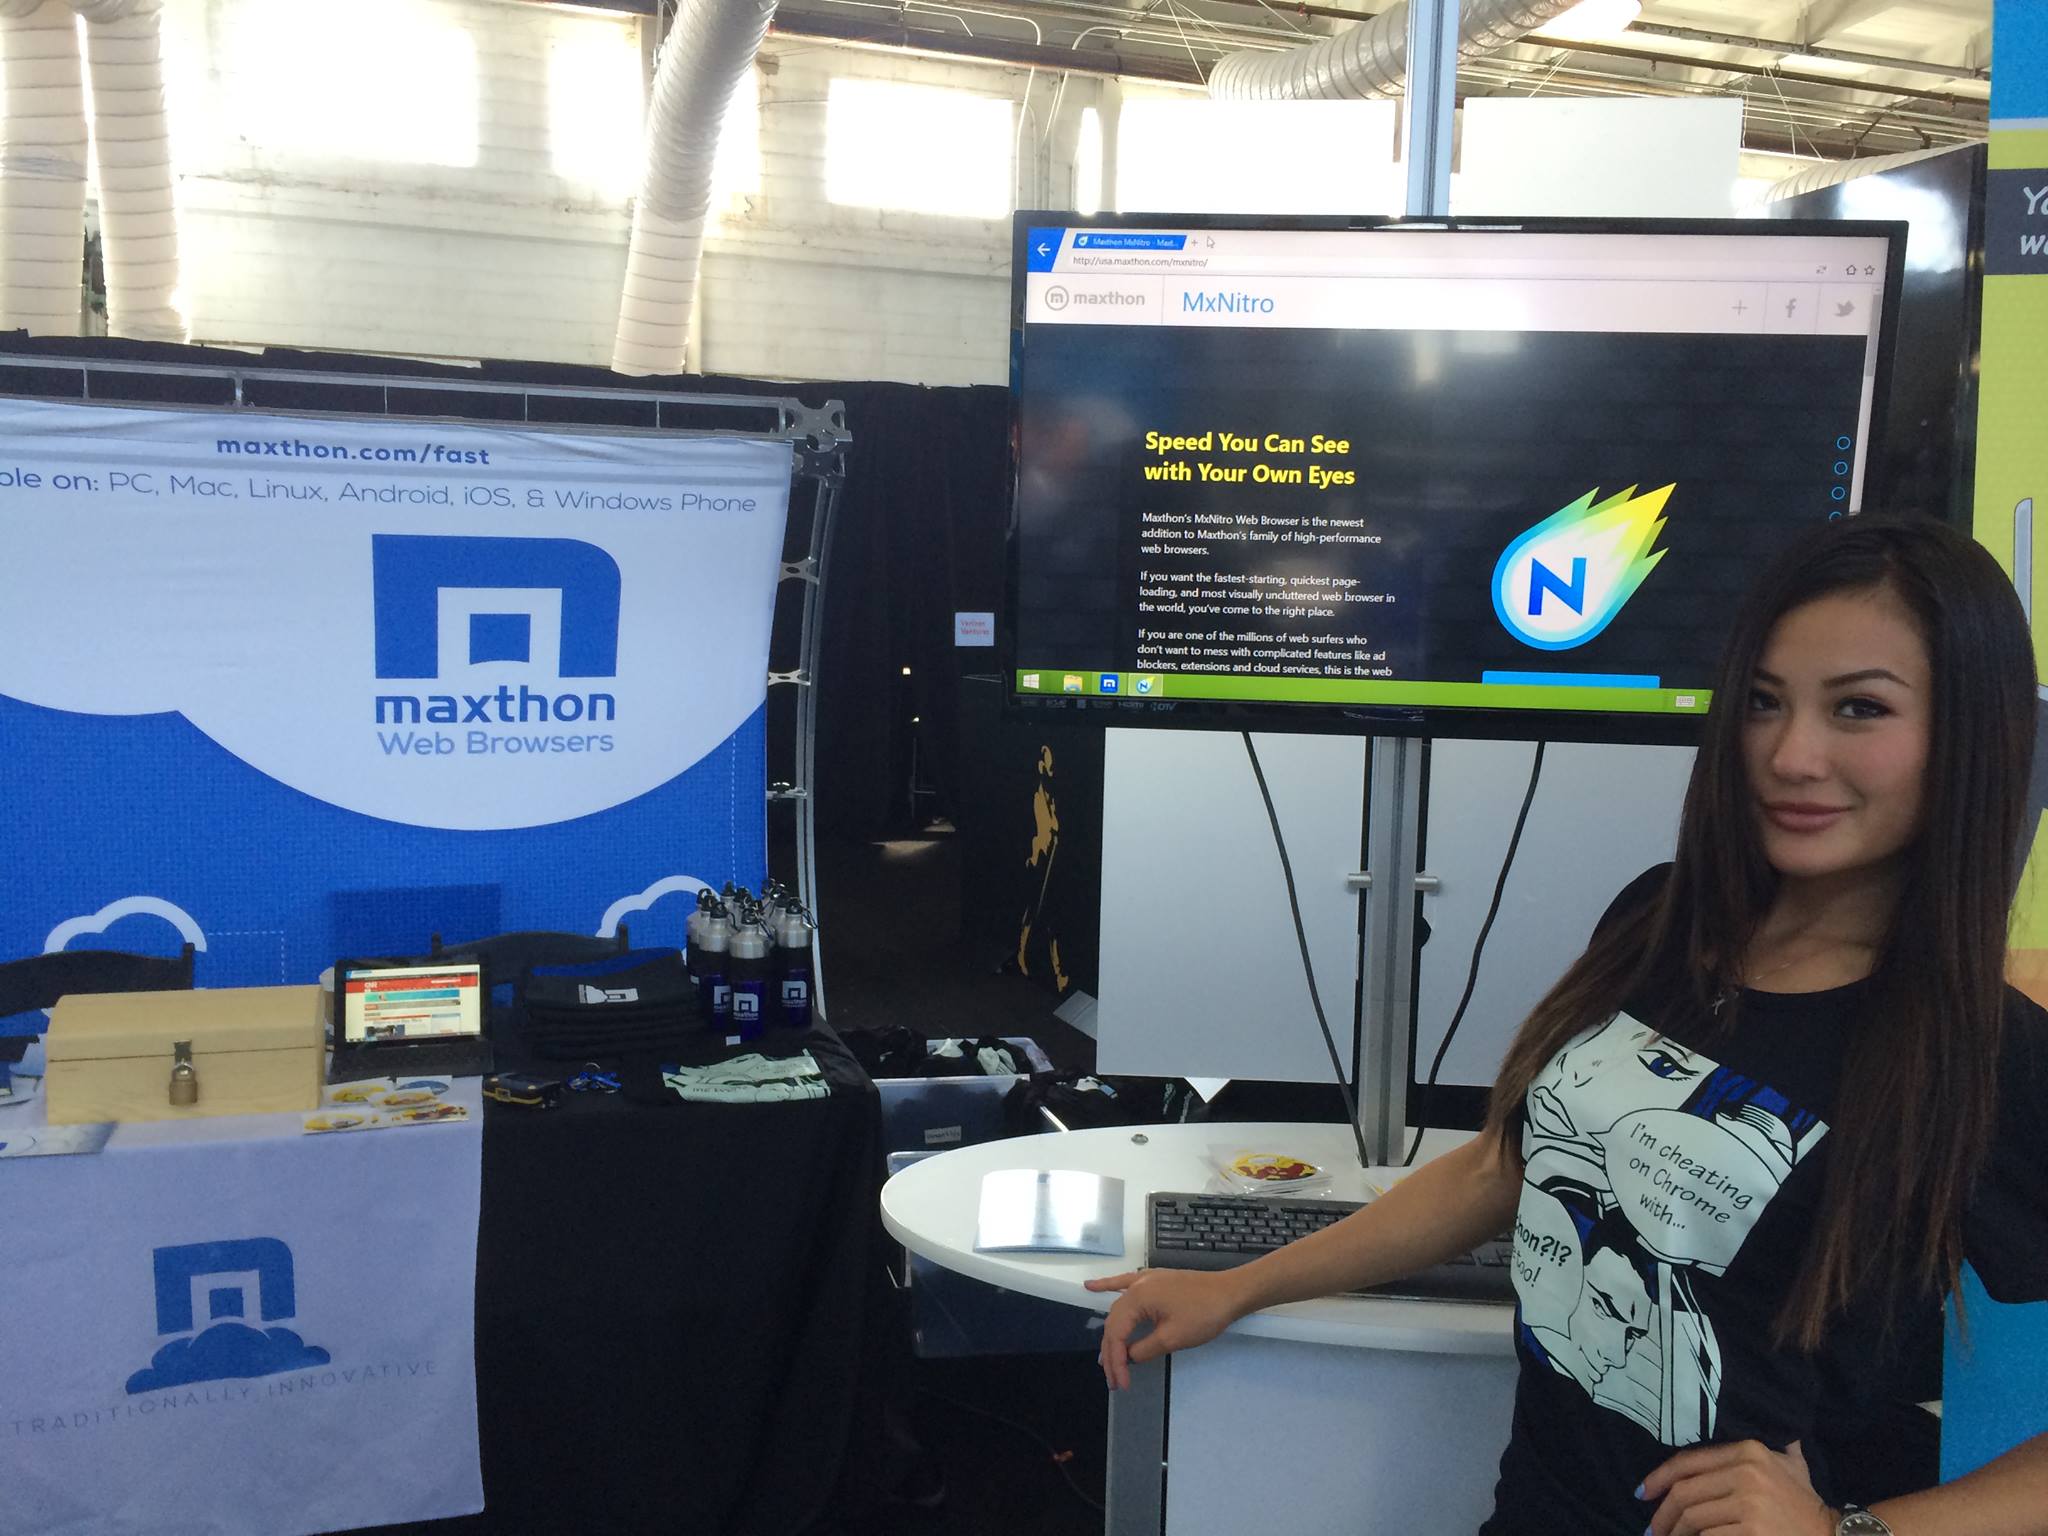 Maxthon at a recent expo. It's fast!